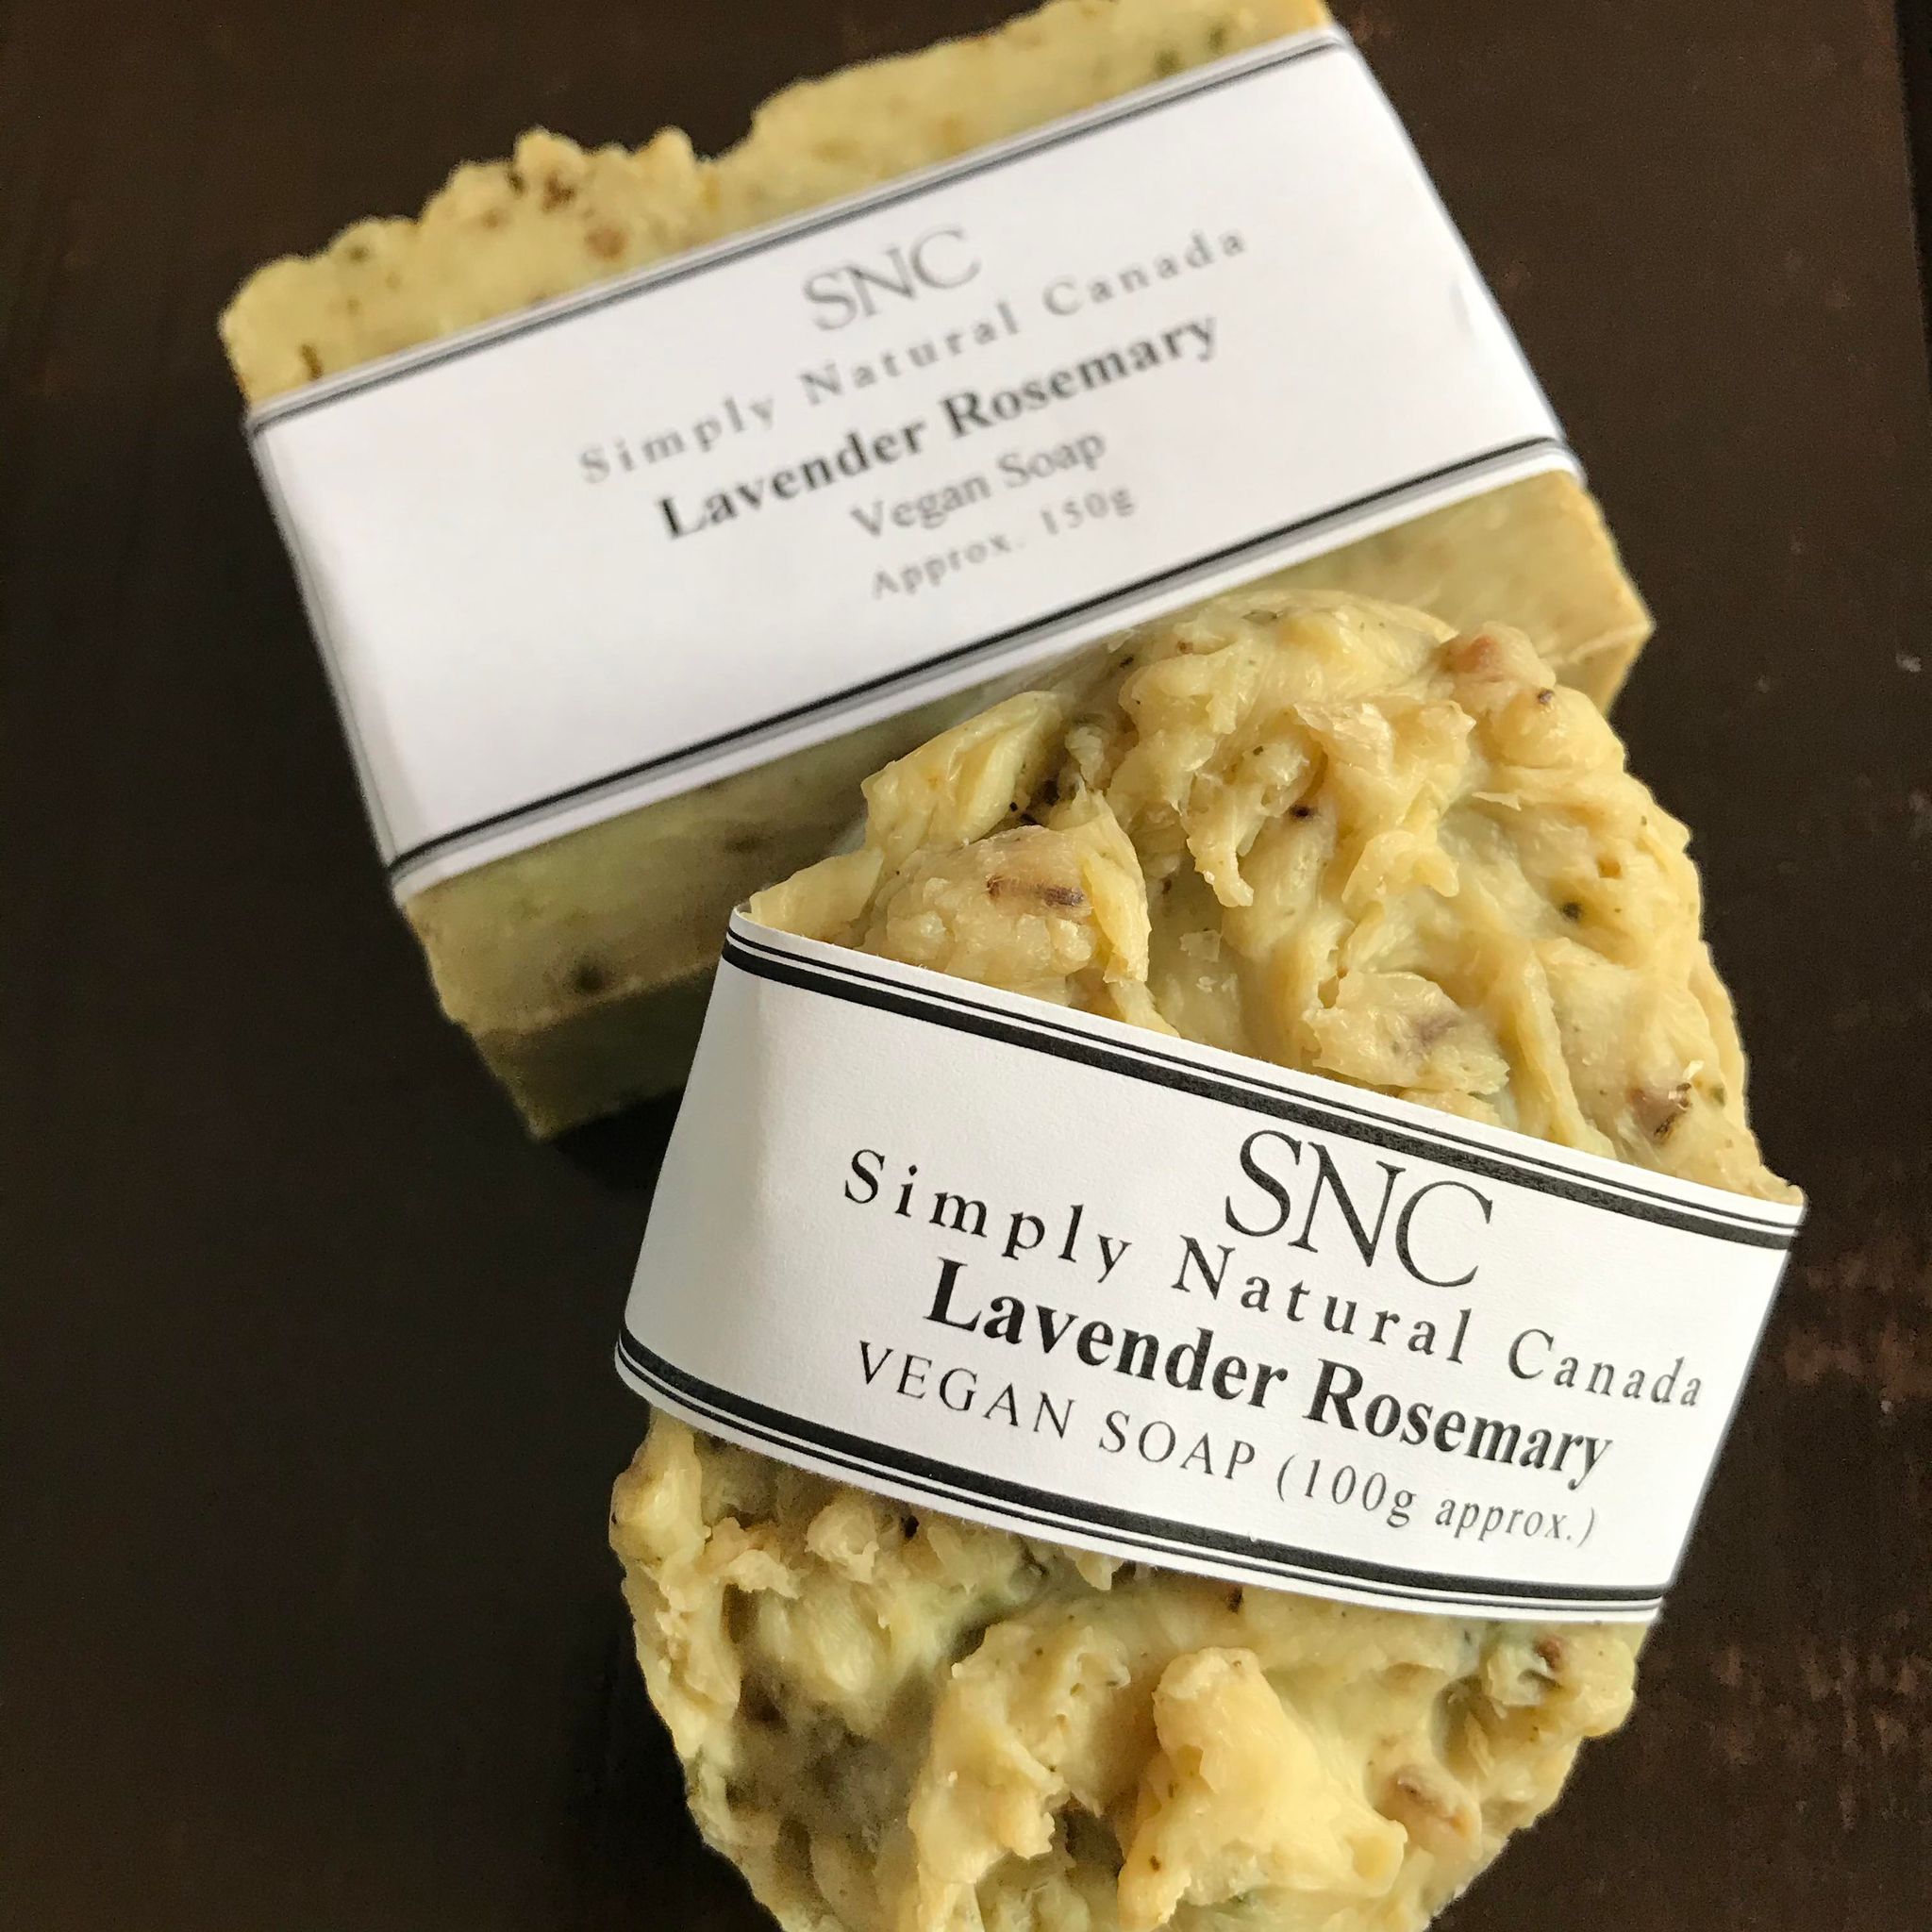 Handcrafted essential oil lavender and rosemary vegan soap made in Canada by Simply Natural Canada